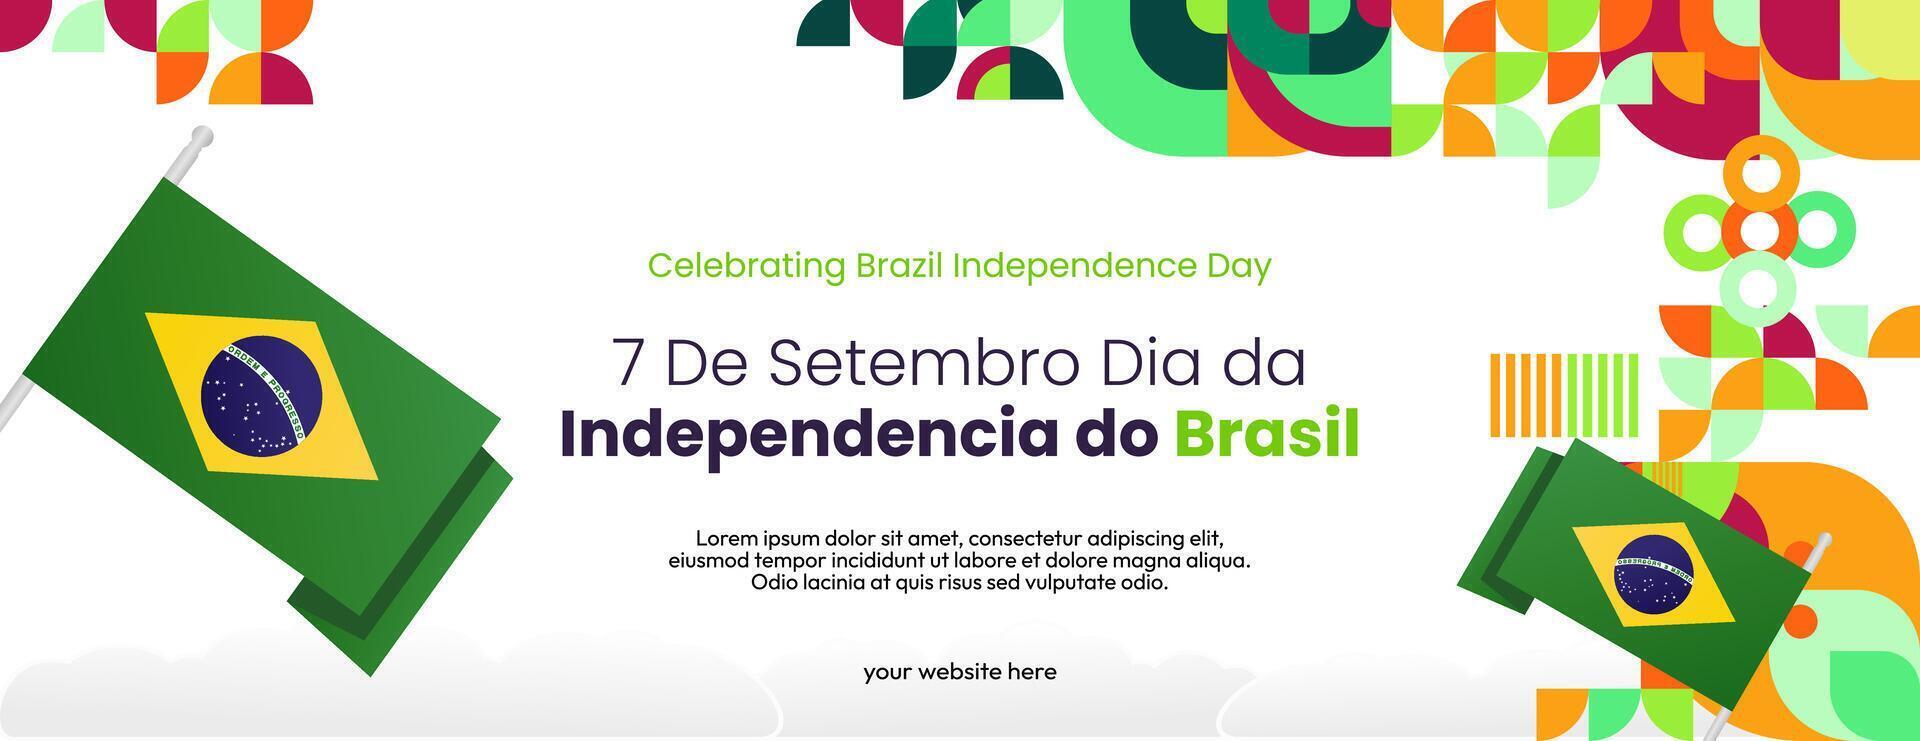 Brazil Independence Day banner in modern colorful geometric style. National Independence Day greeting card with typography. Horizontal background for national holiday celebration party vector